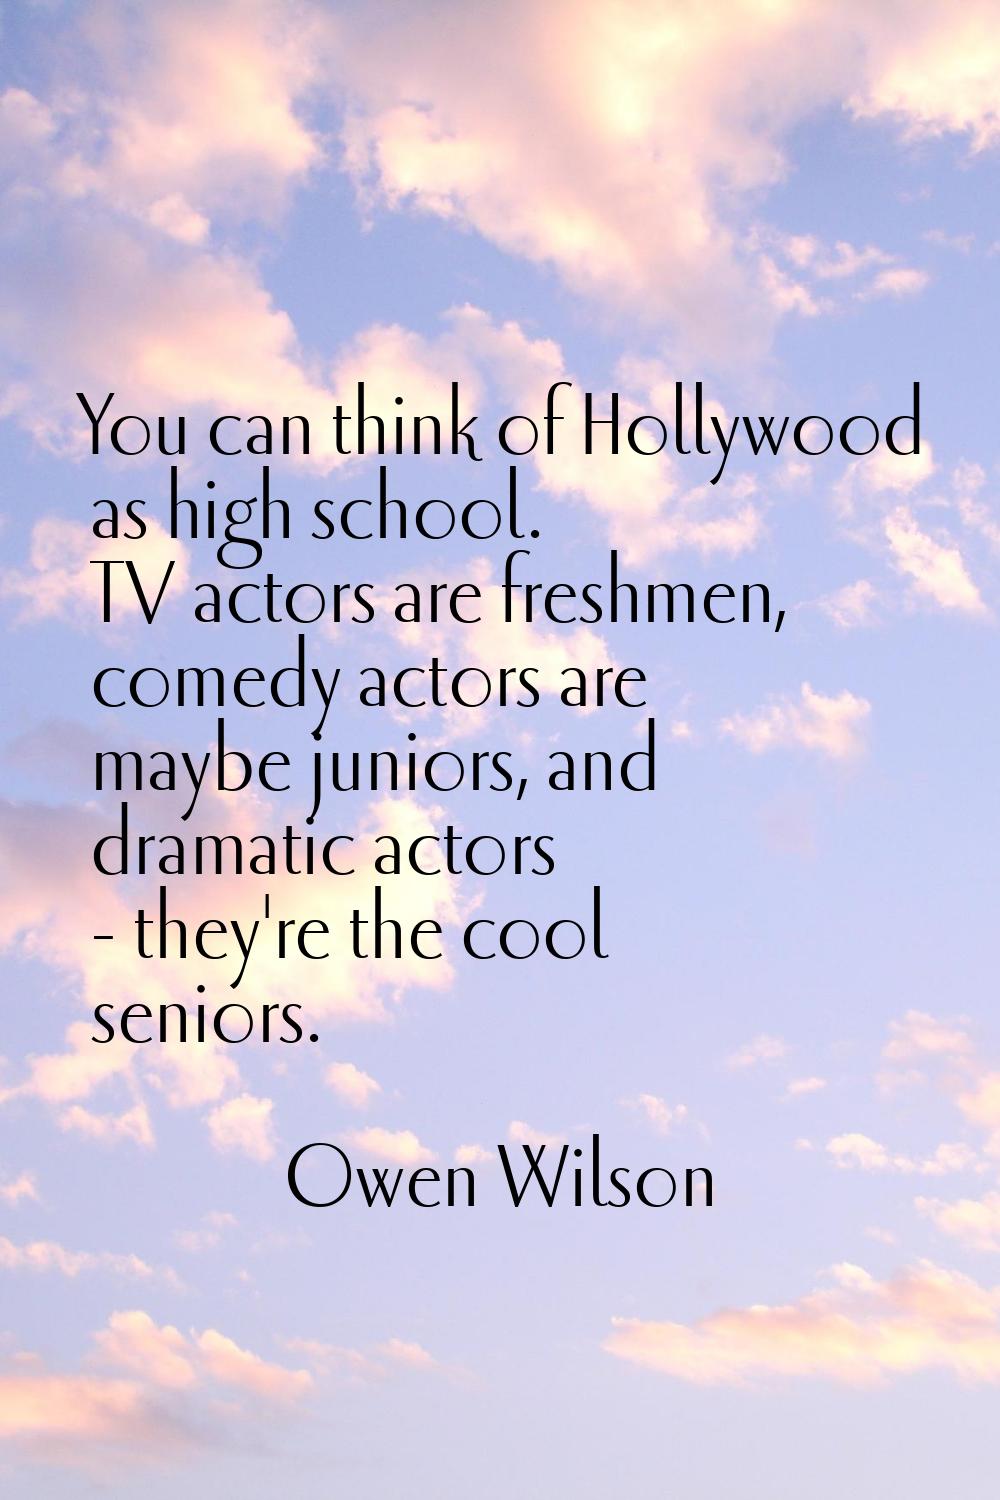 You can think of Hollywood as high school. TV actors are freshmen, comedy actors are maybe juniors,